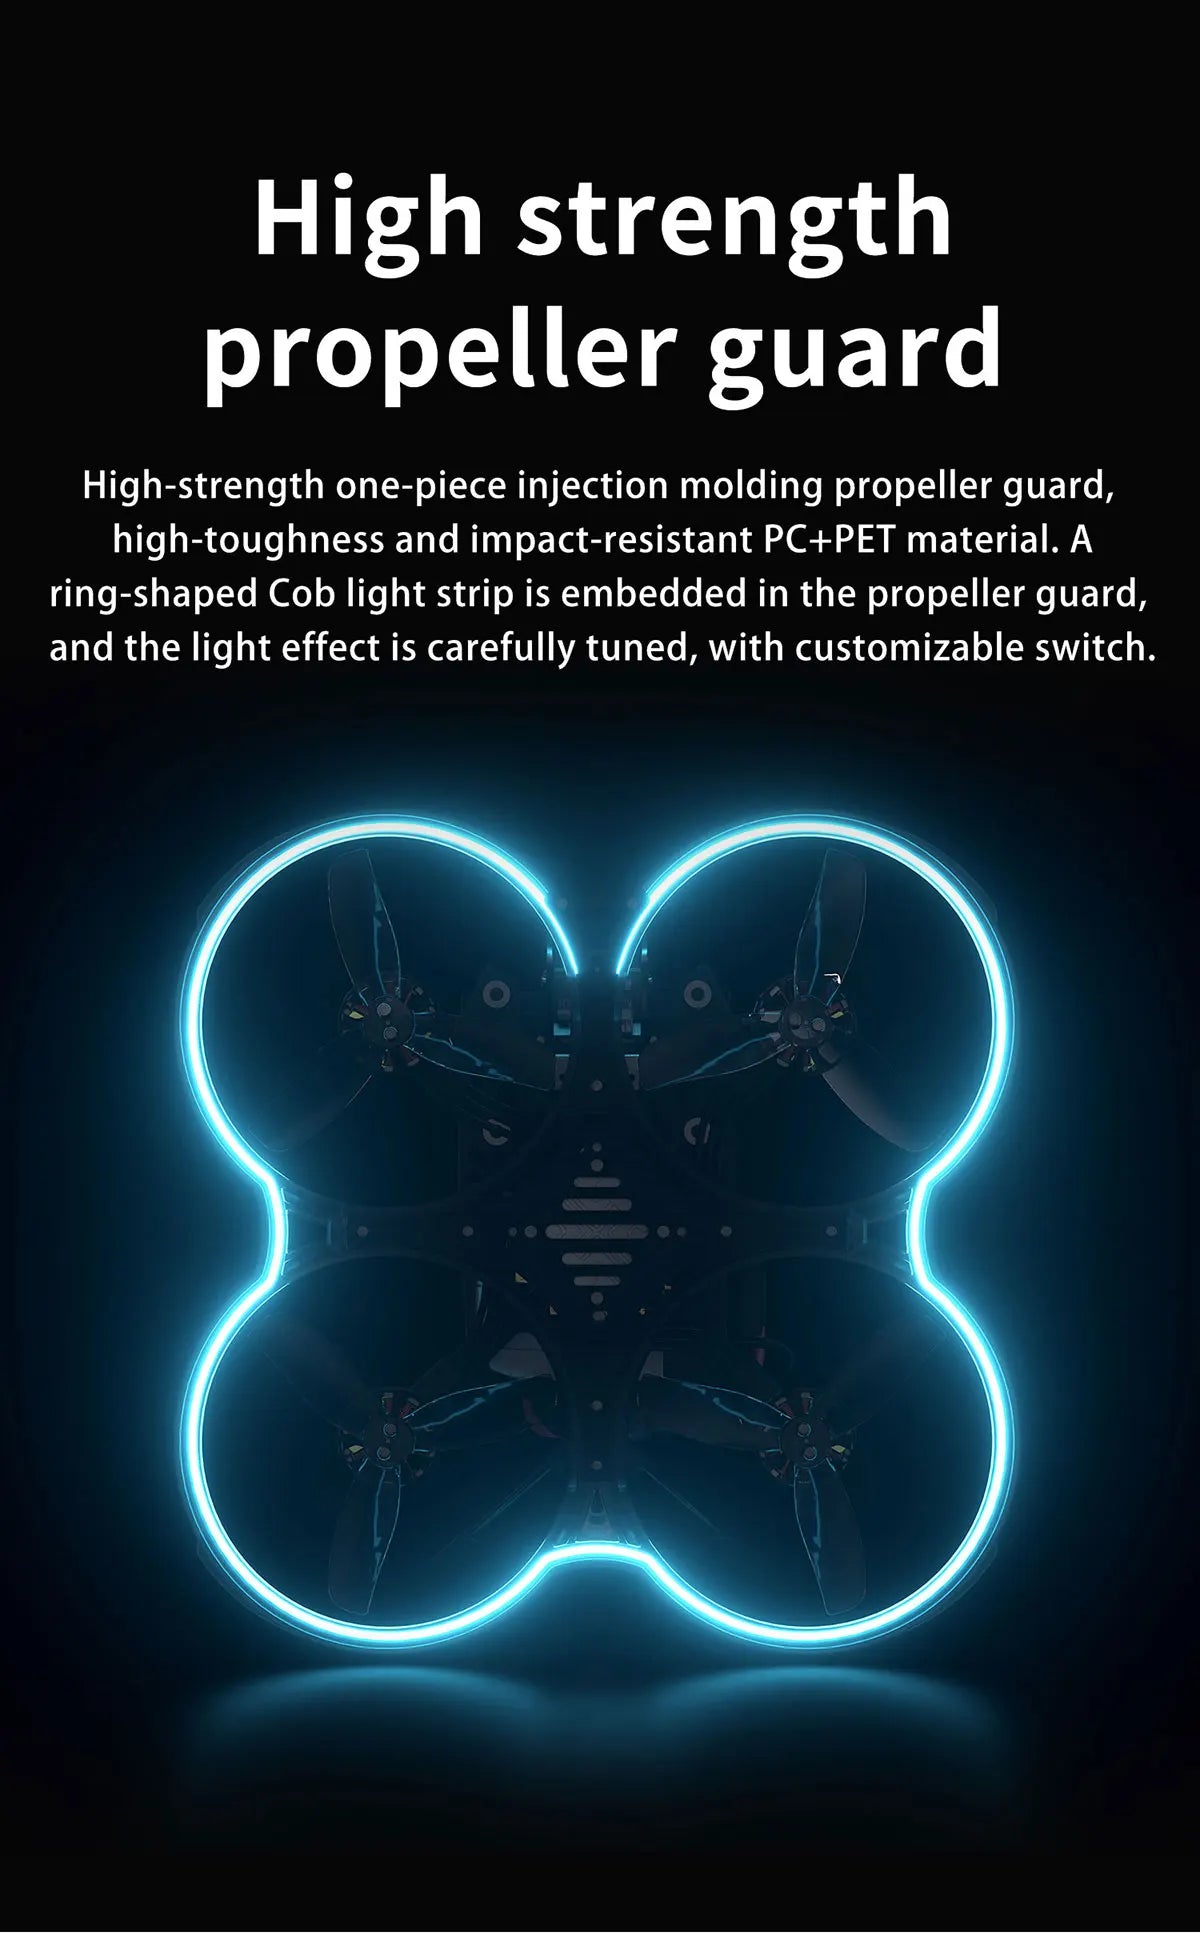 GEPRC Cinebot 30 FPV Drone, a ring-shaped light strip is embedded in the propeller guard . a